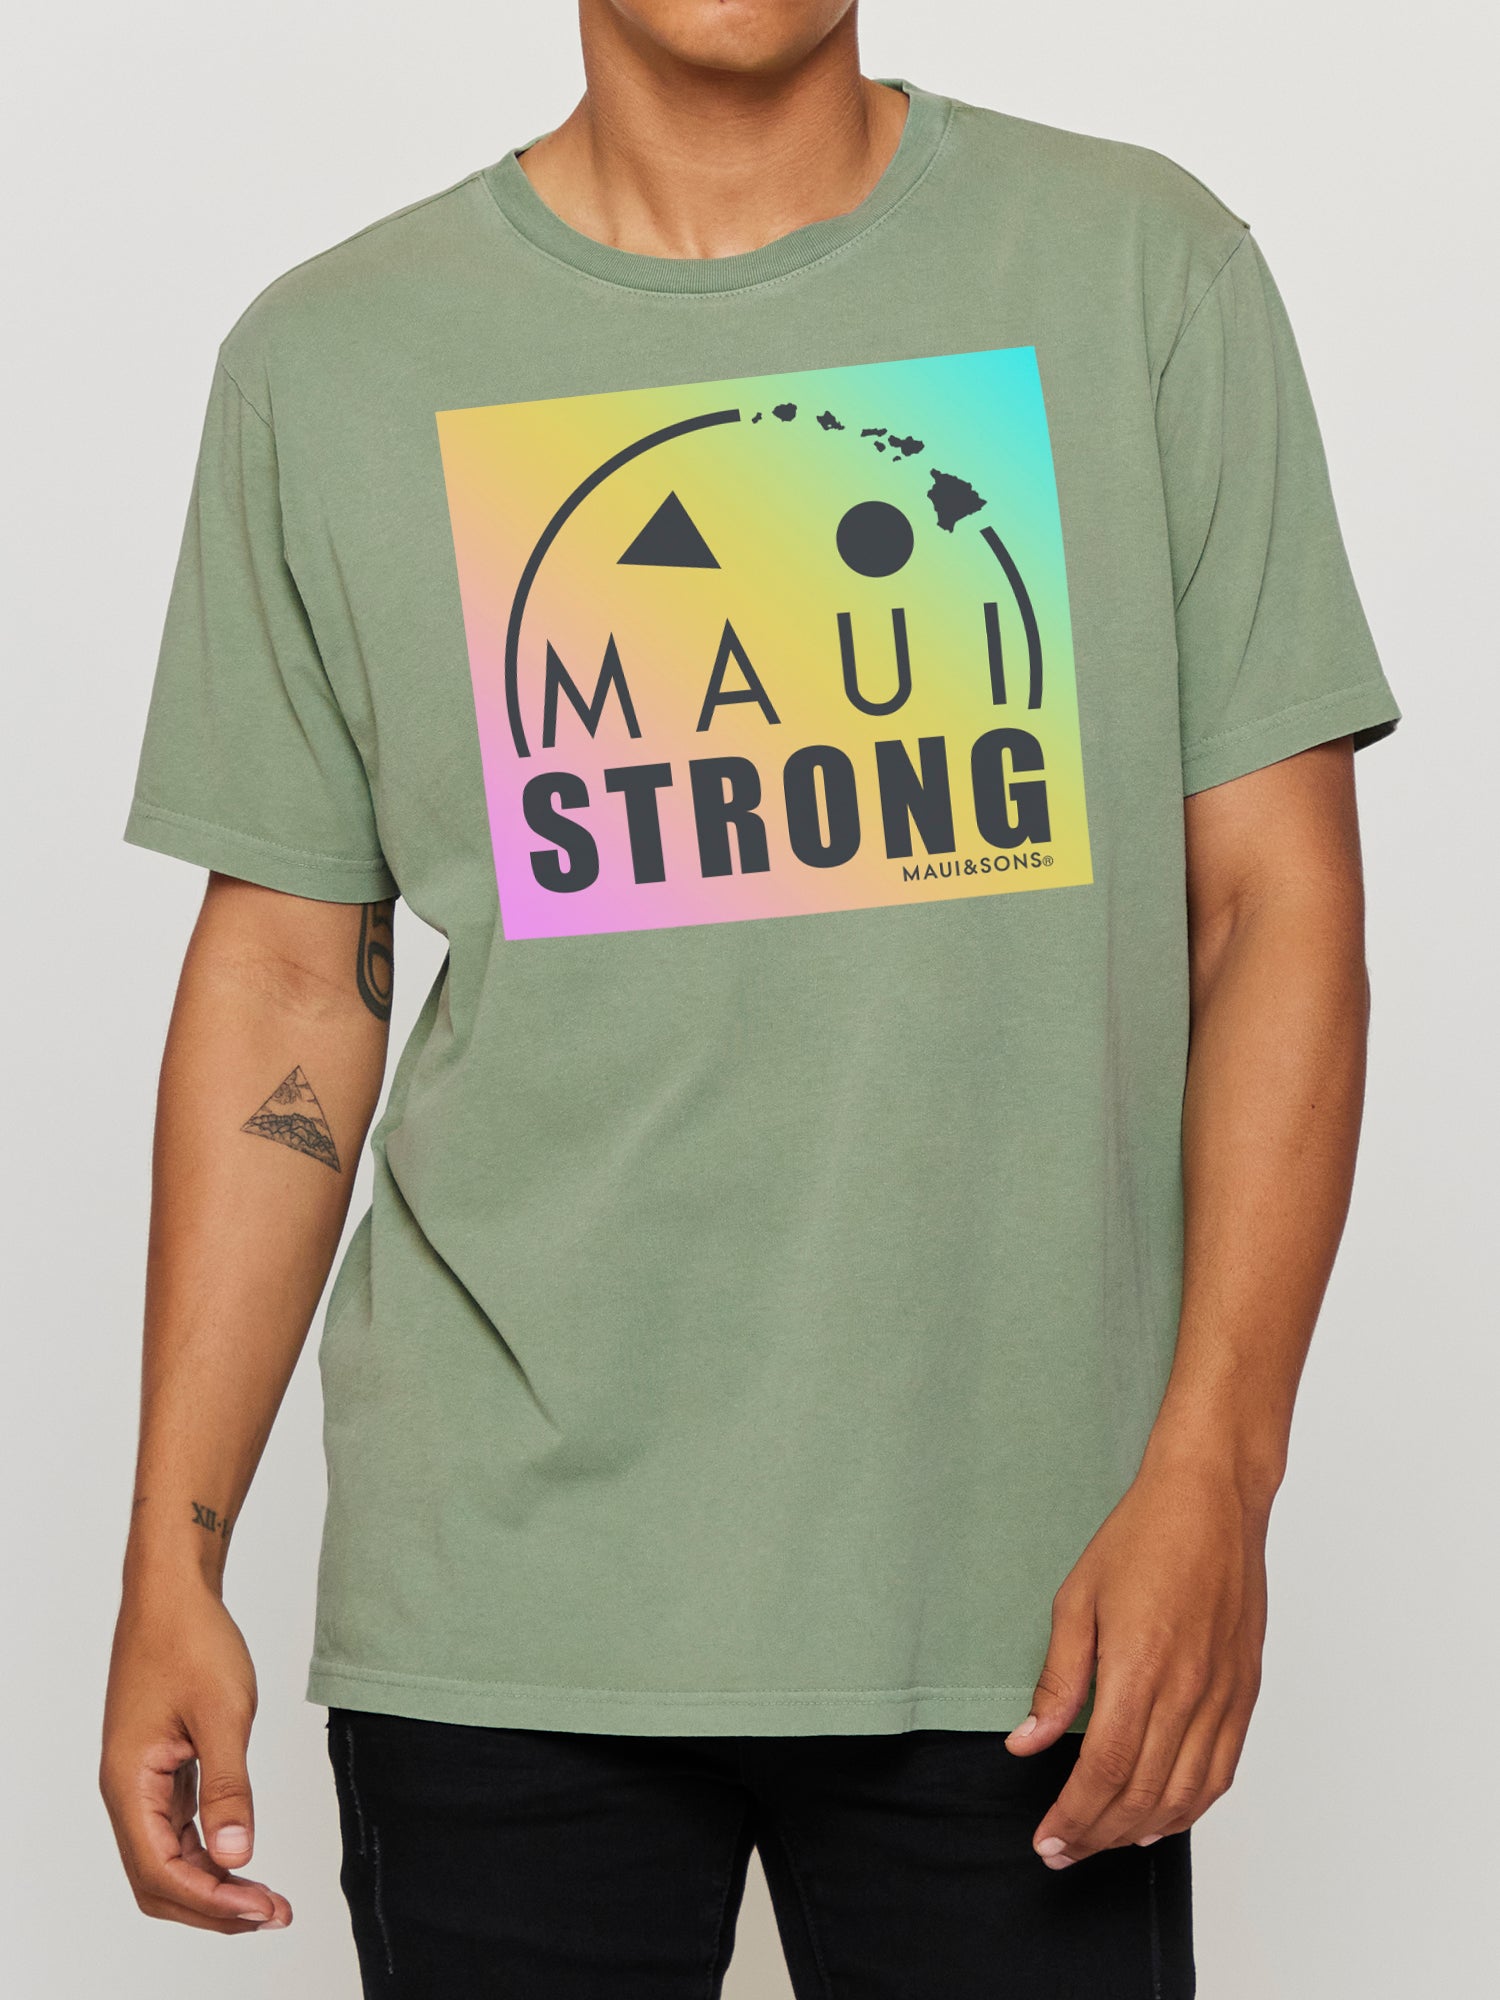 Maui Strong T-Shirt in Green Maui Sons